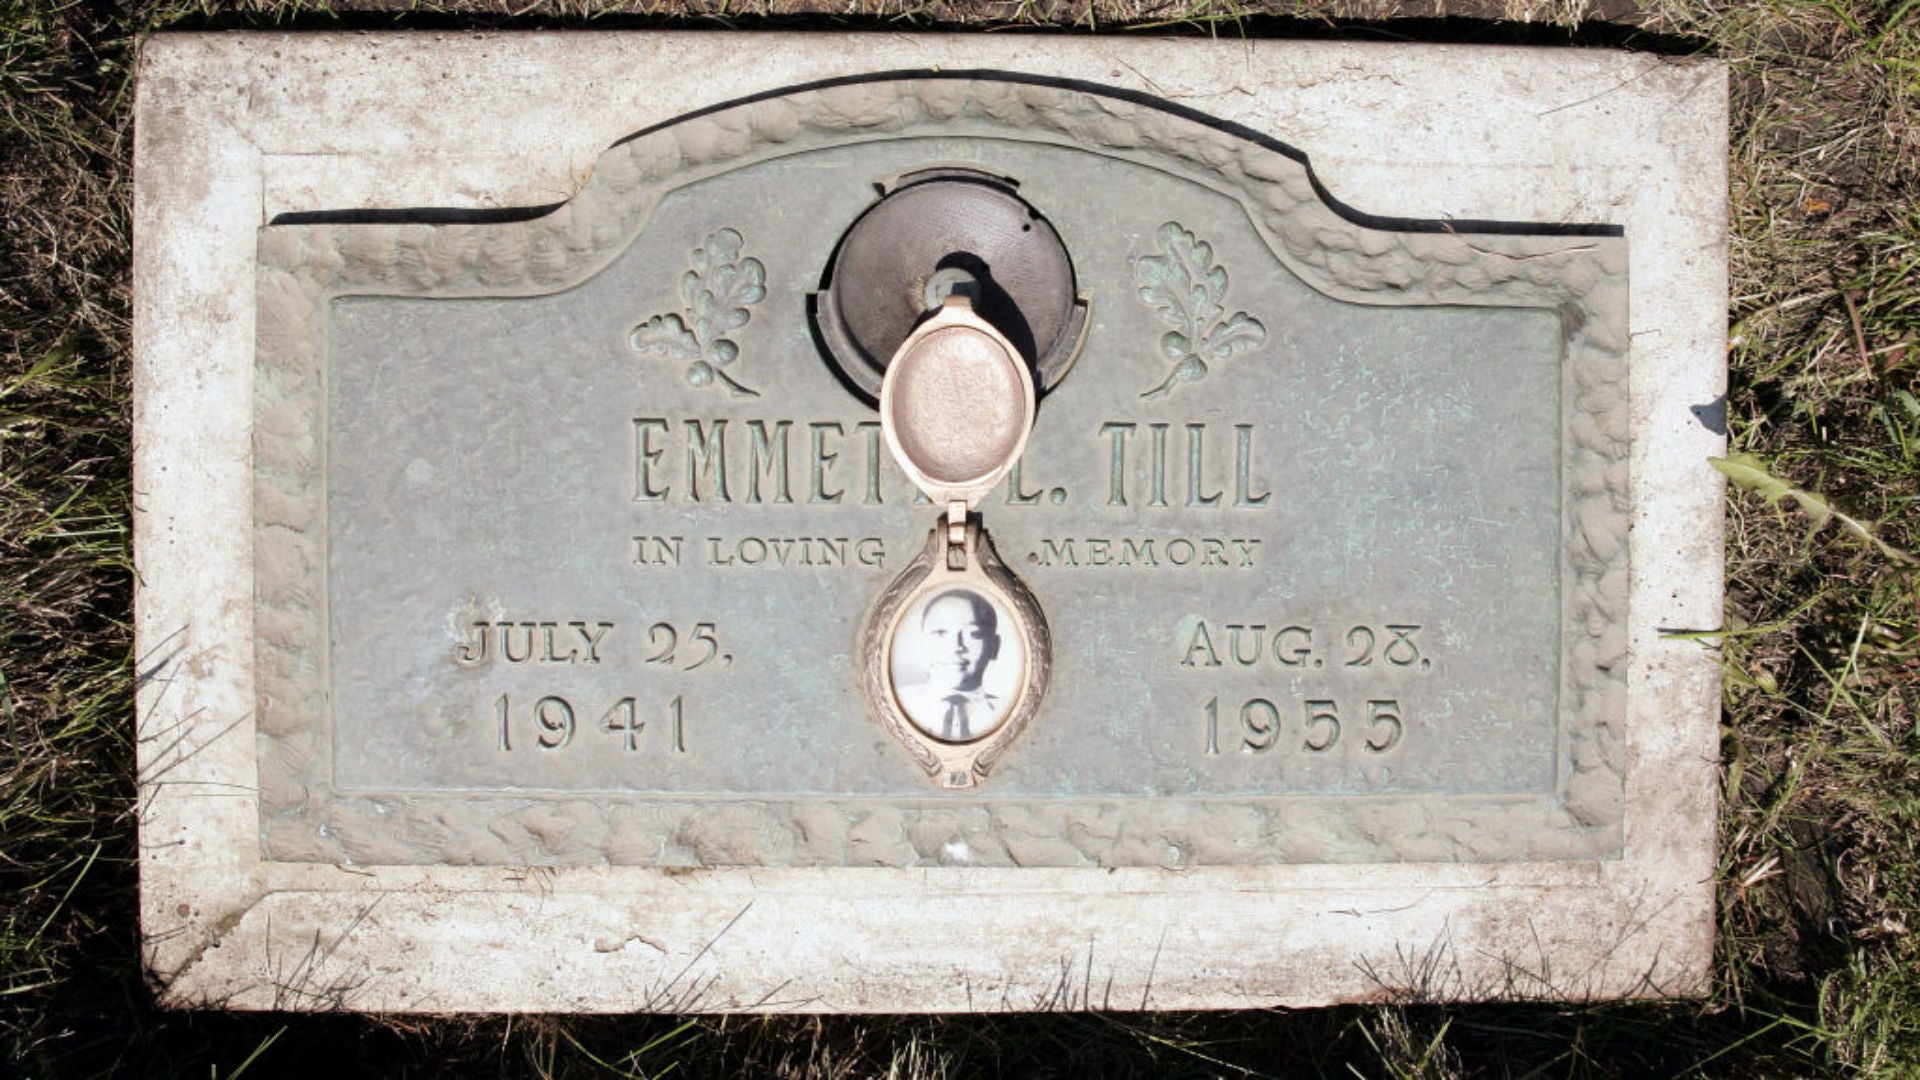 White Nationalists Tried To Record Video In Front Of Emmett Till Memorial